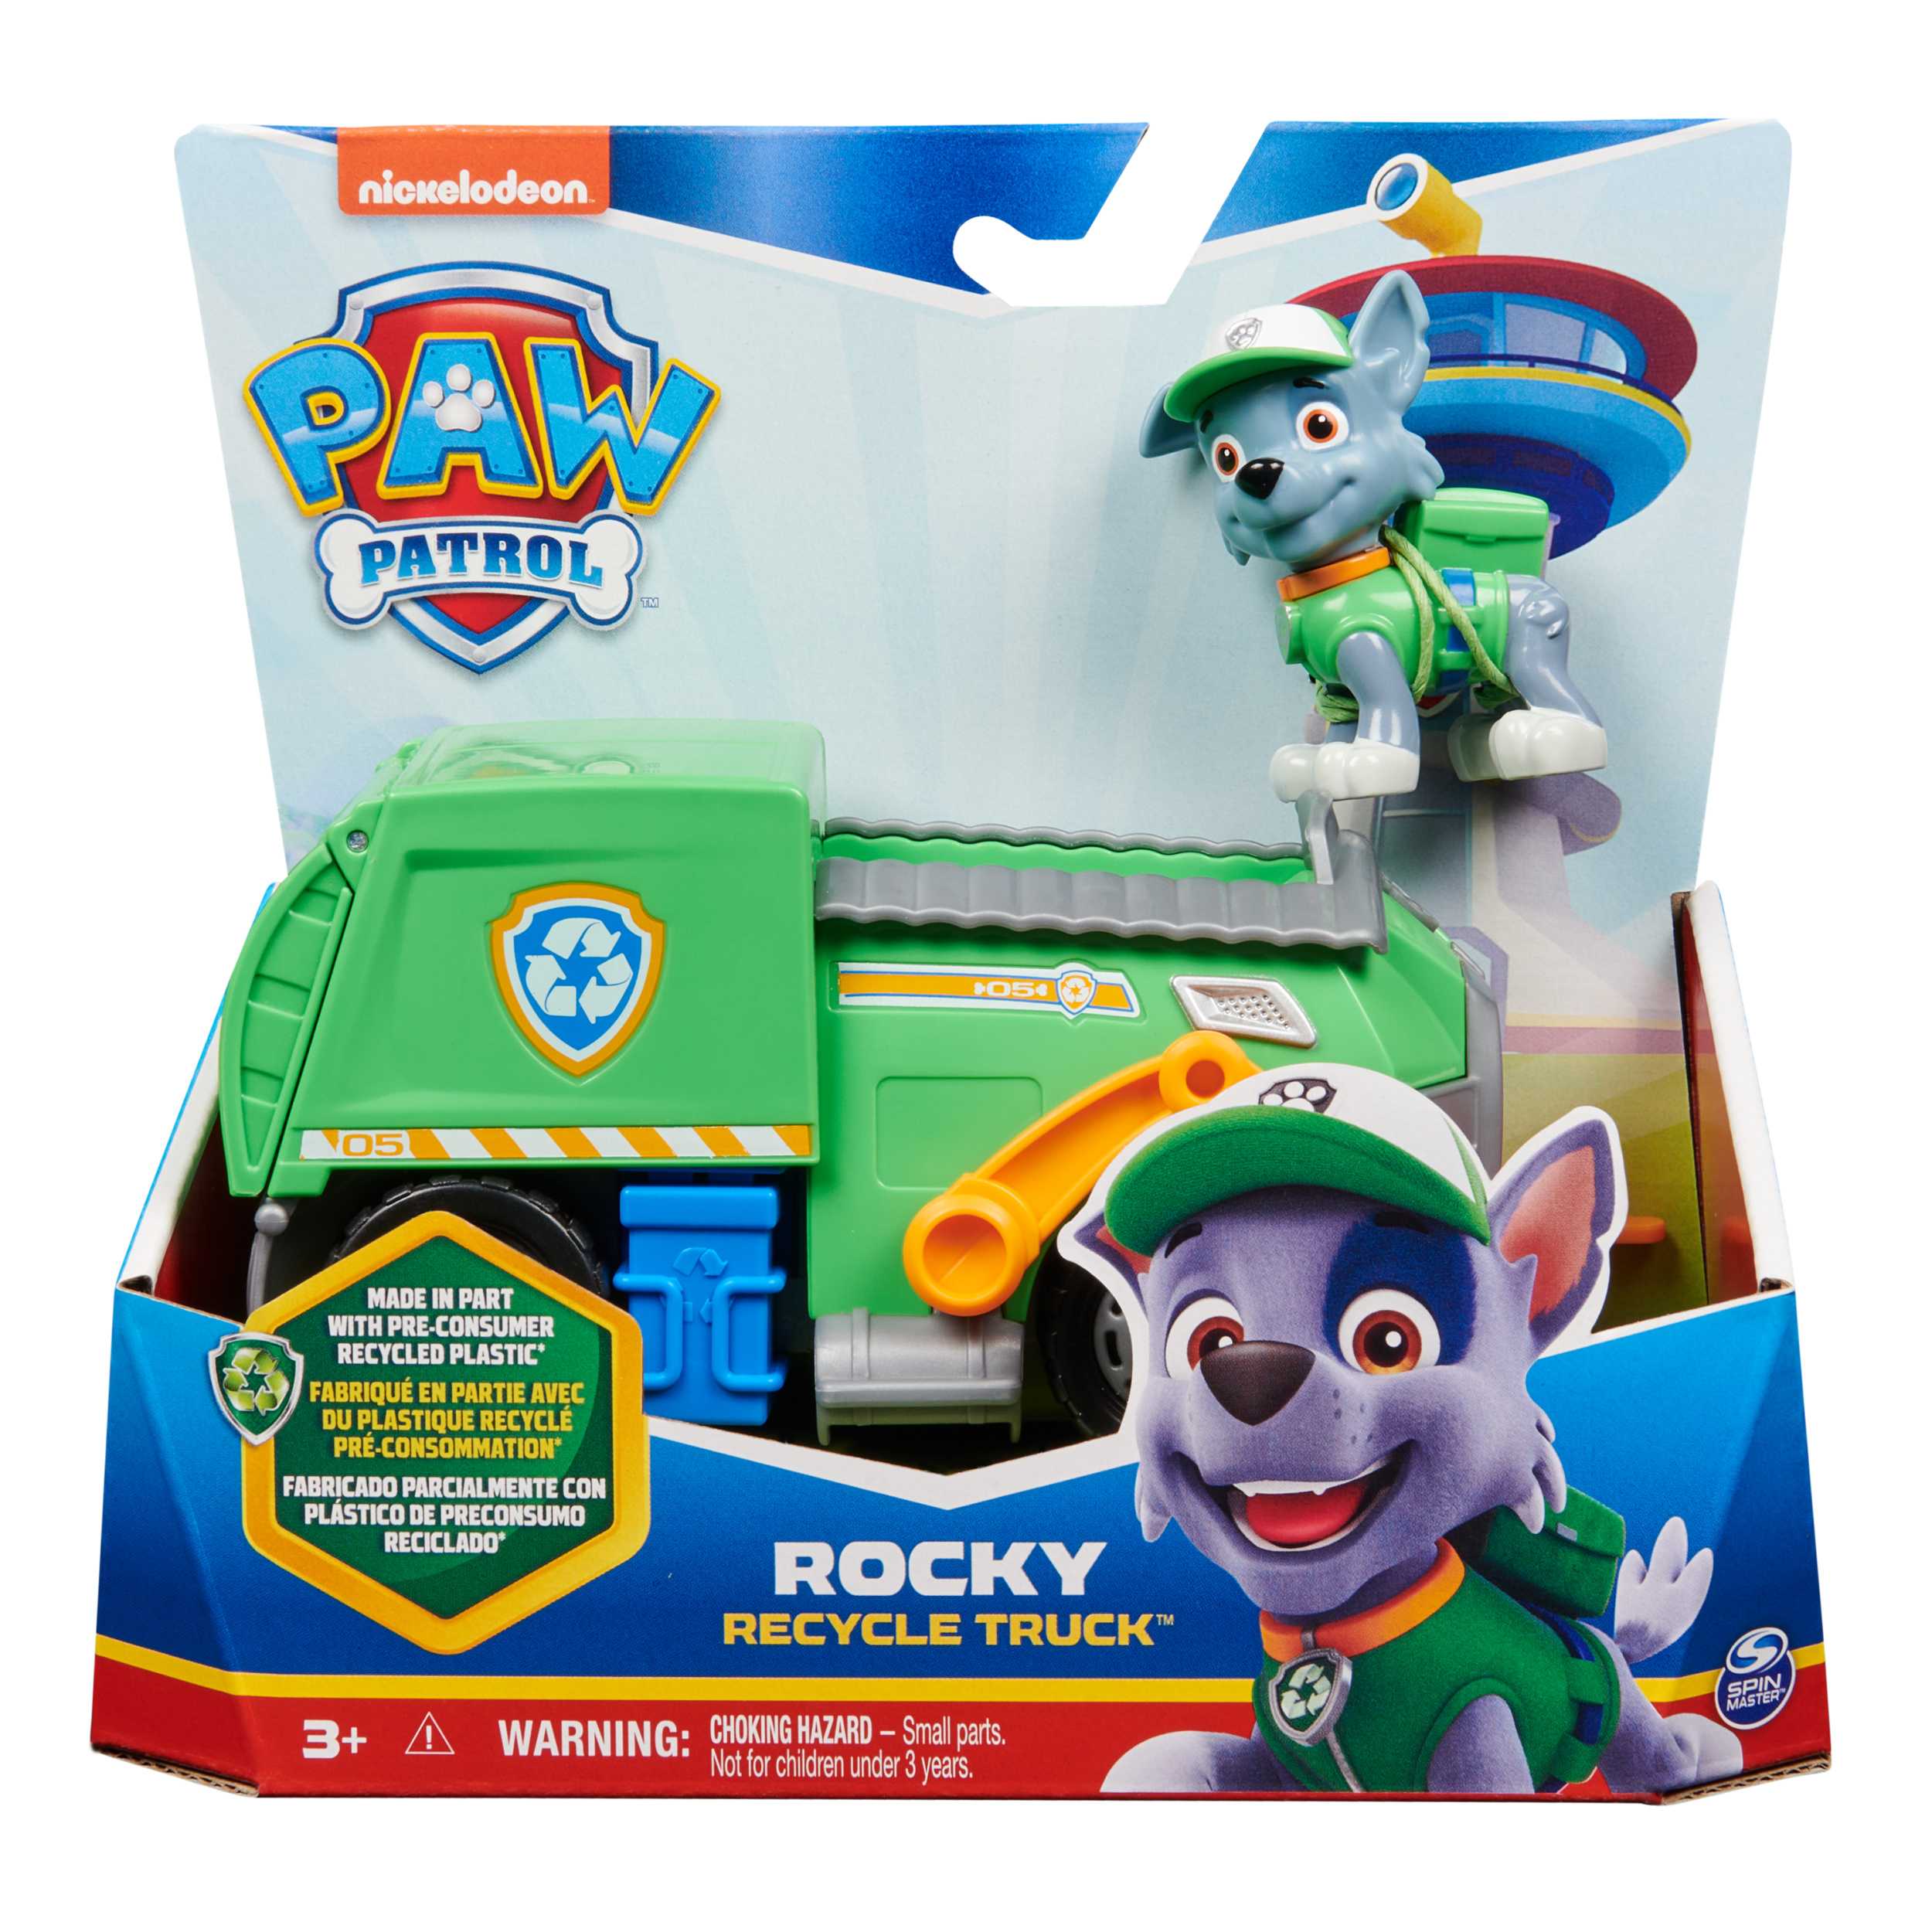 PAW PATROL ROCKY RECYCLE TRUCK VEHICLE